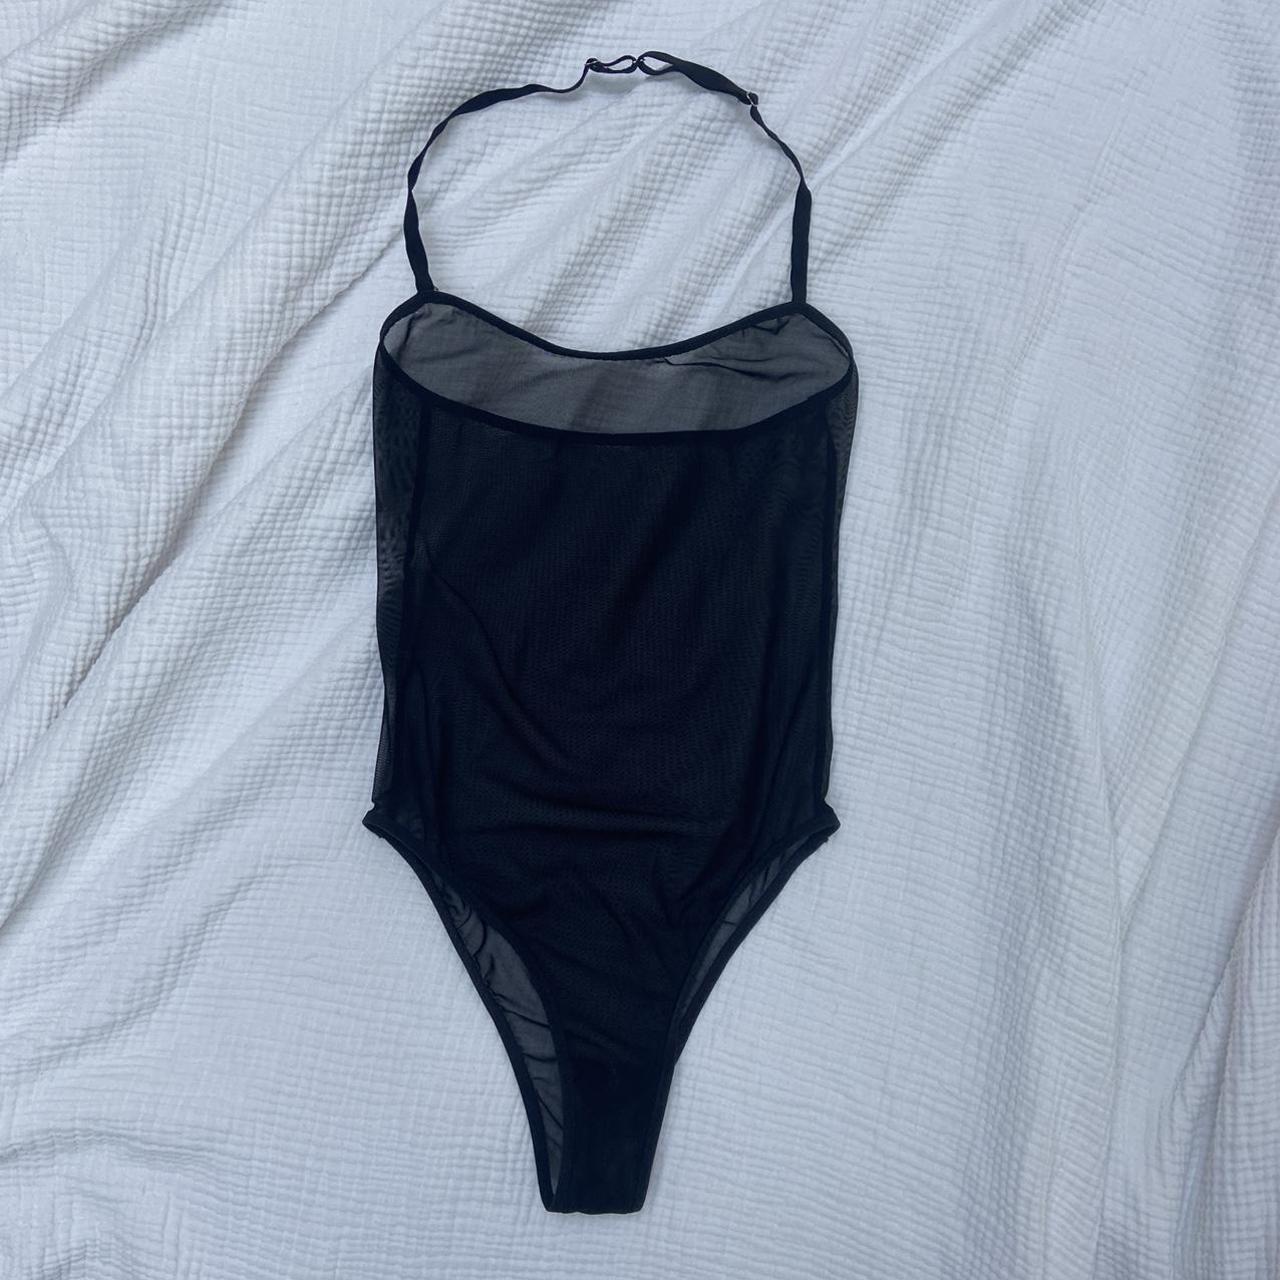 Mesh & sheer halter neck body suit. Size 6 (there... - Depop